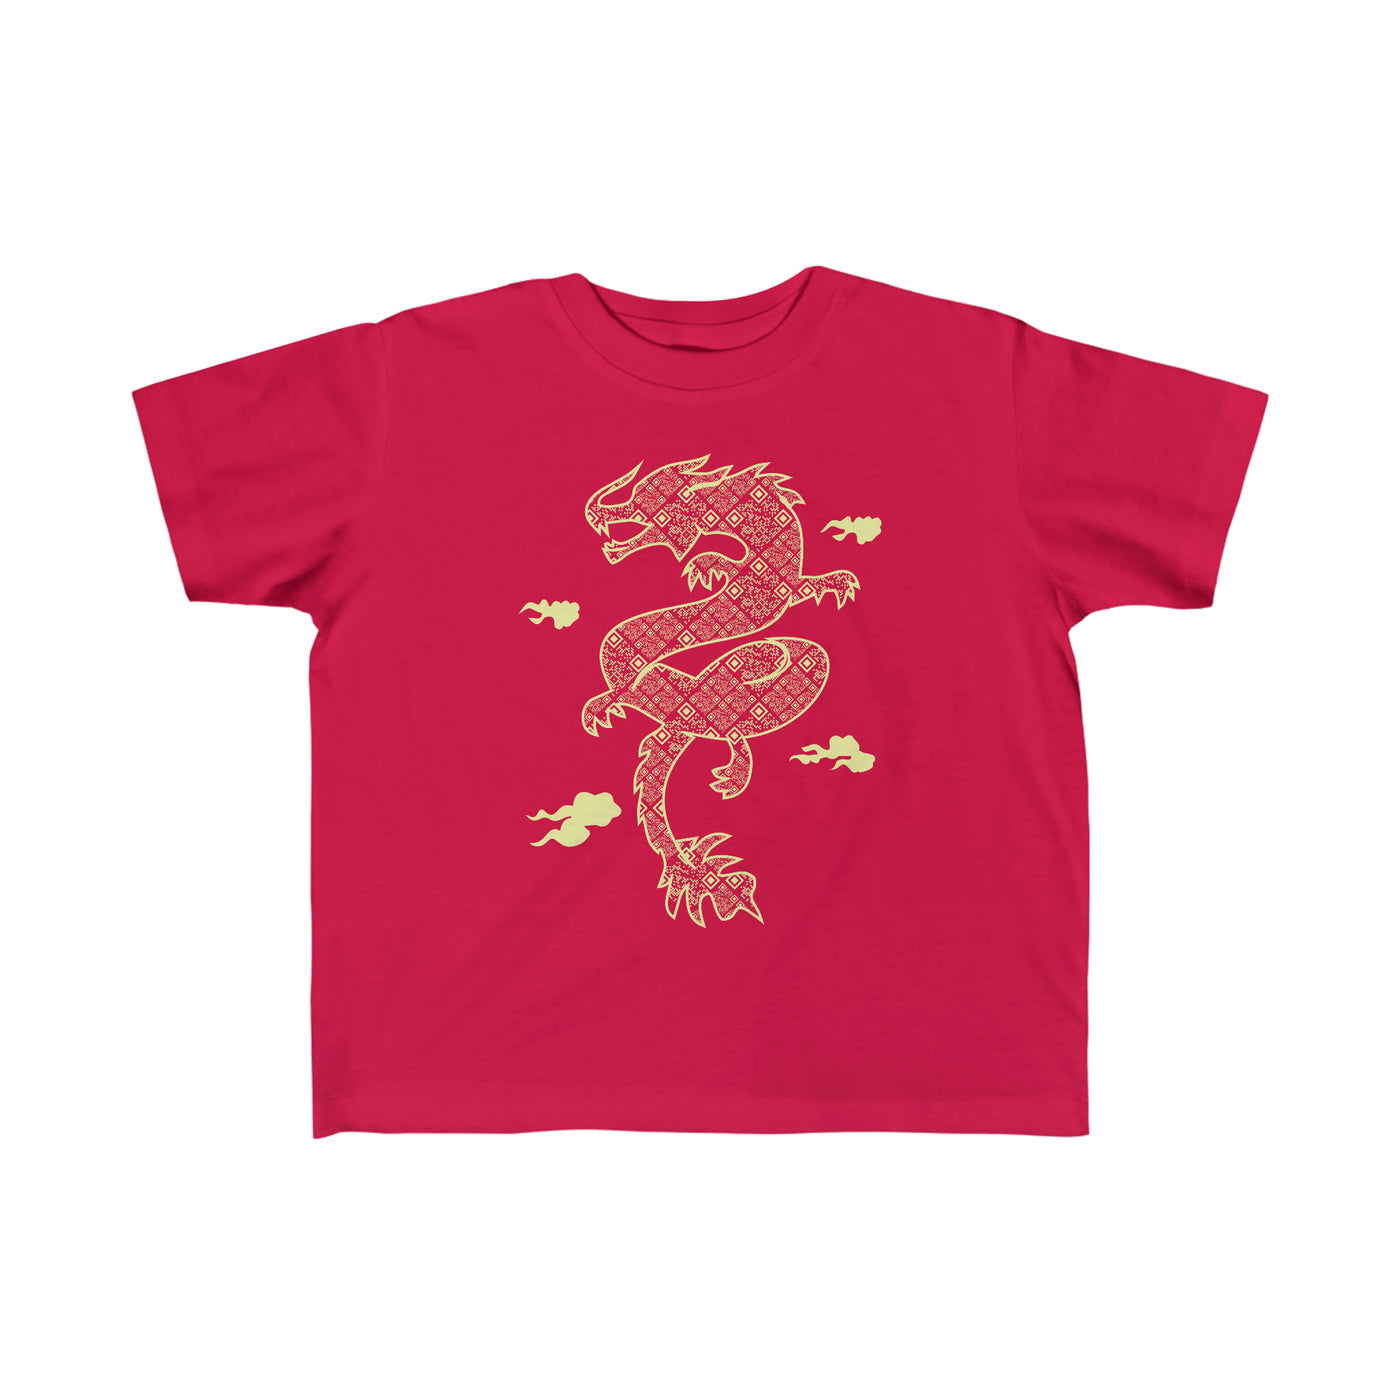 XR Reality Collection: Year of the Dragon (Unisex) Toddler T-Shirt